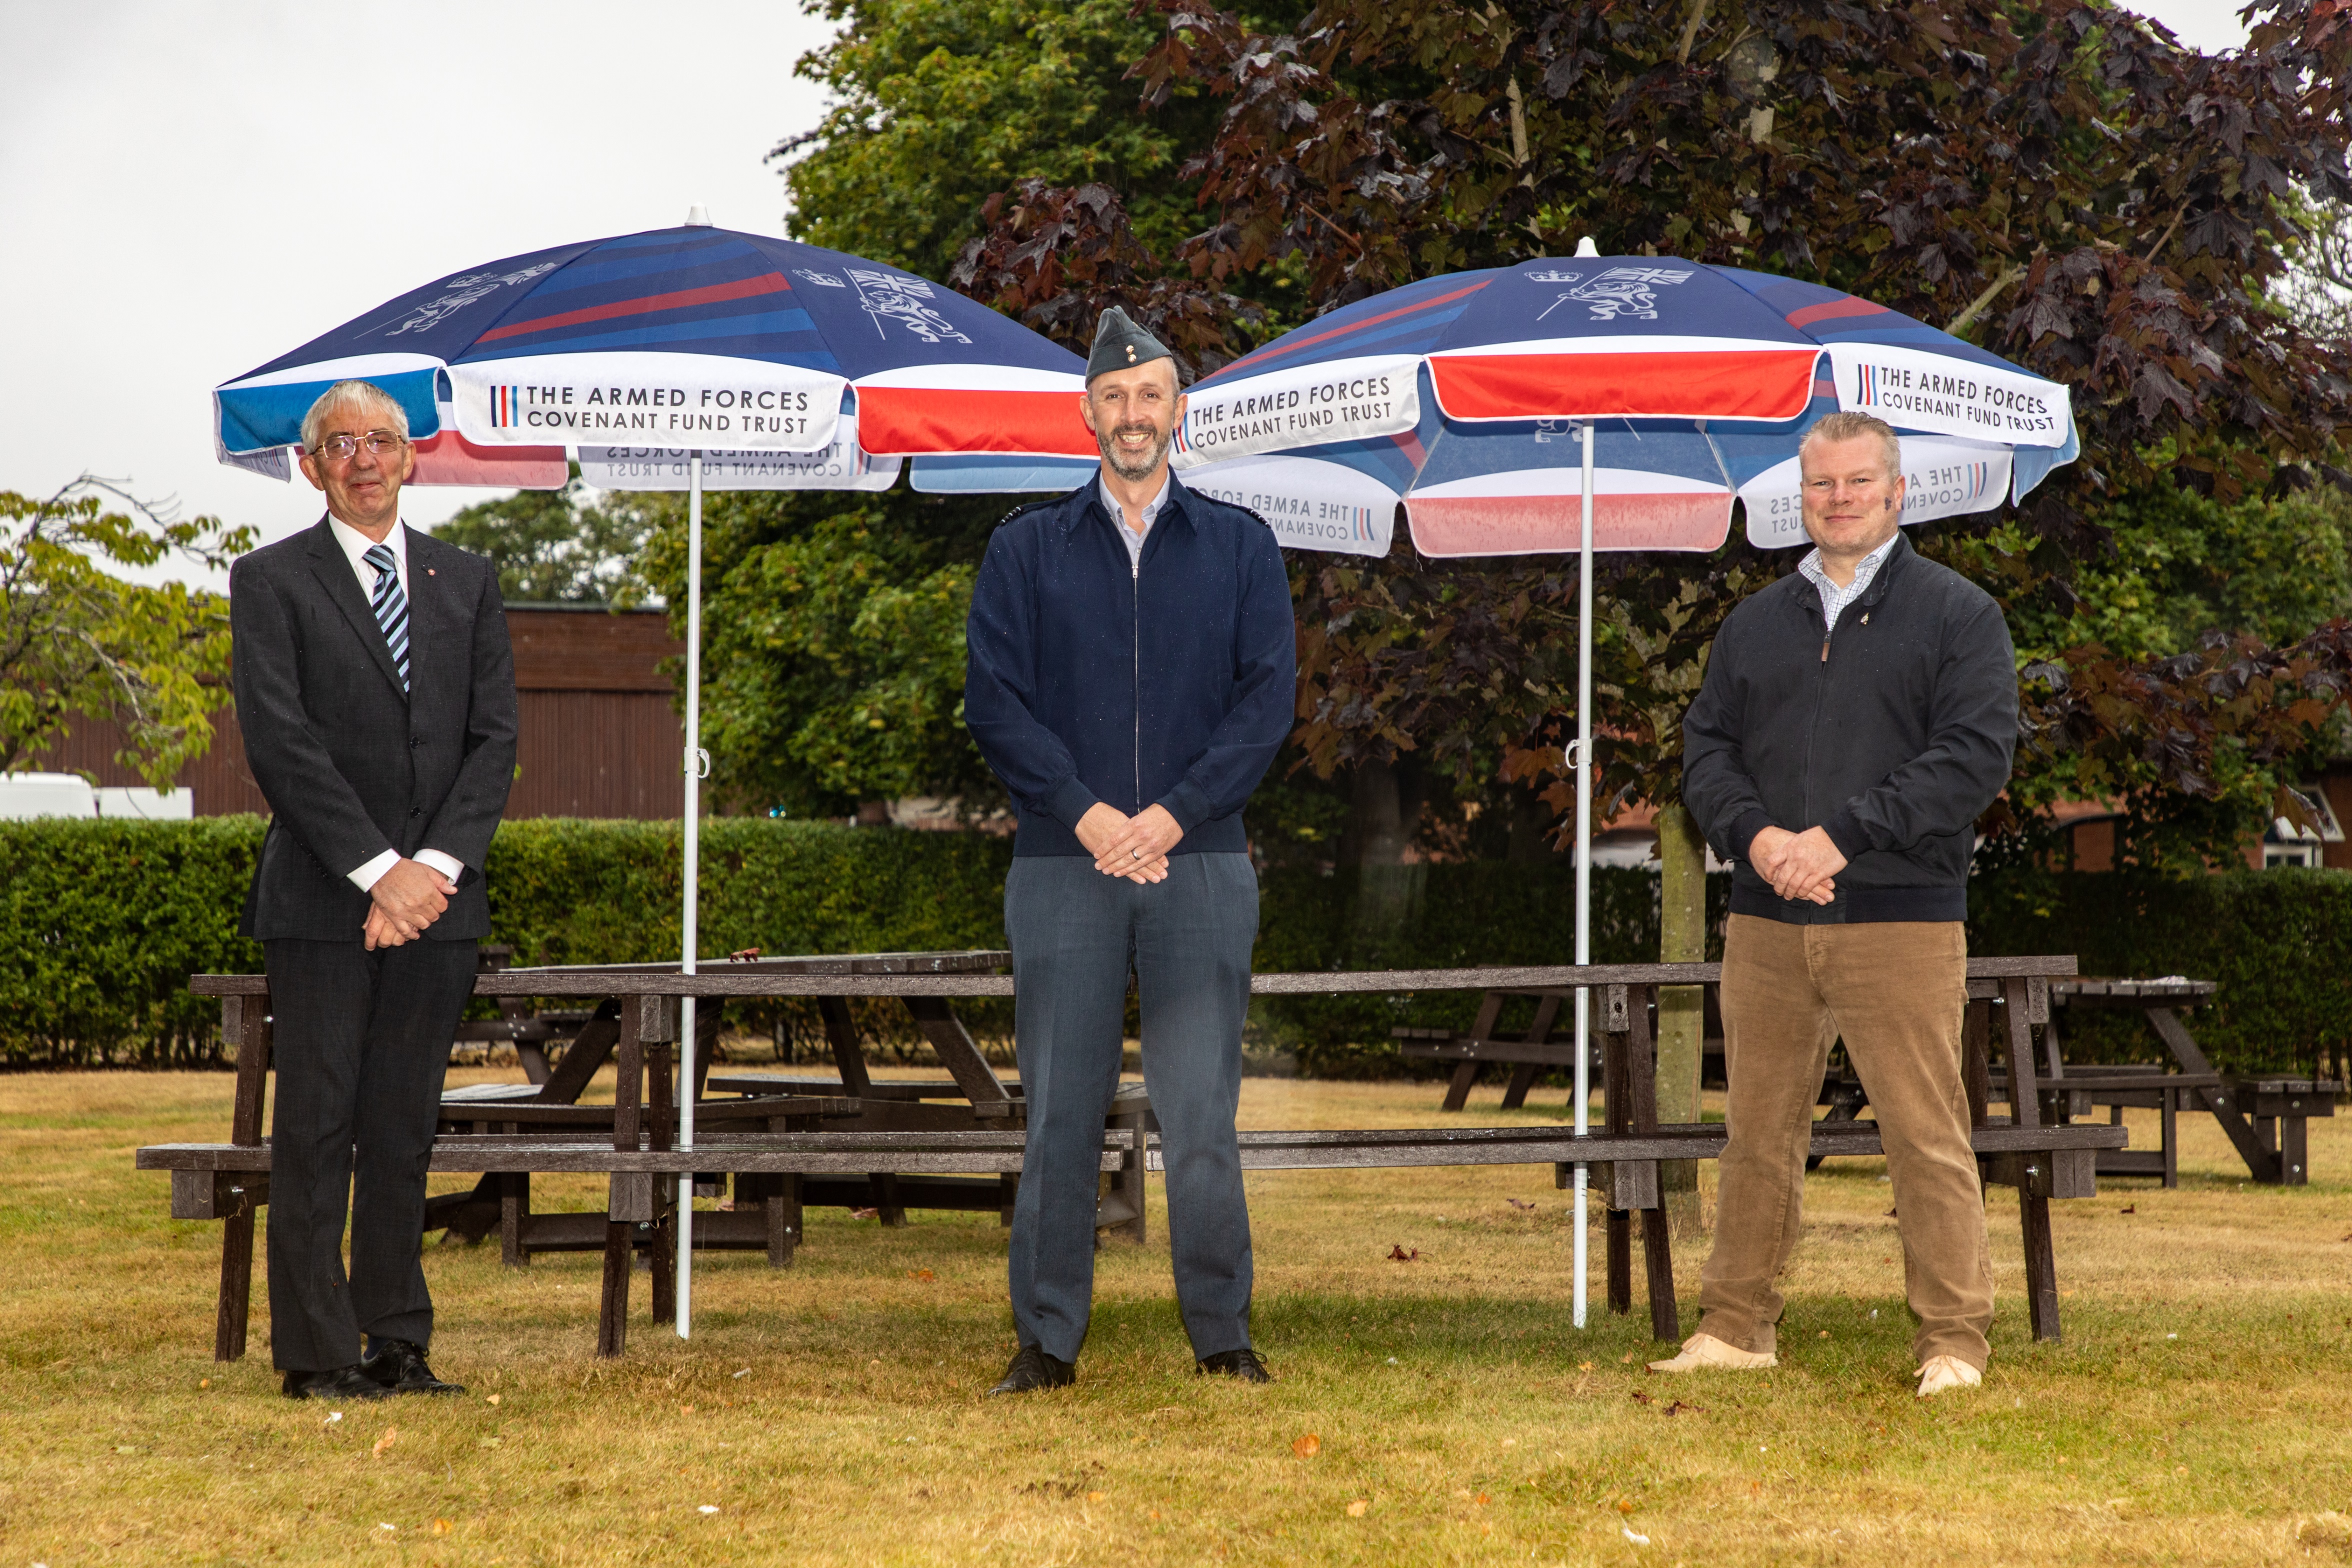 From left to right: Mark Davis MBE, Wing Commander Jez Case and Thomas Kelly with the benches and parasols supplied by the Armed Forces Covenant Fund Trust